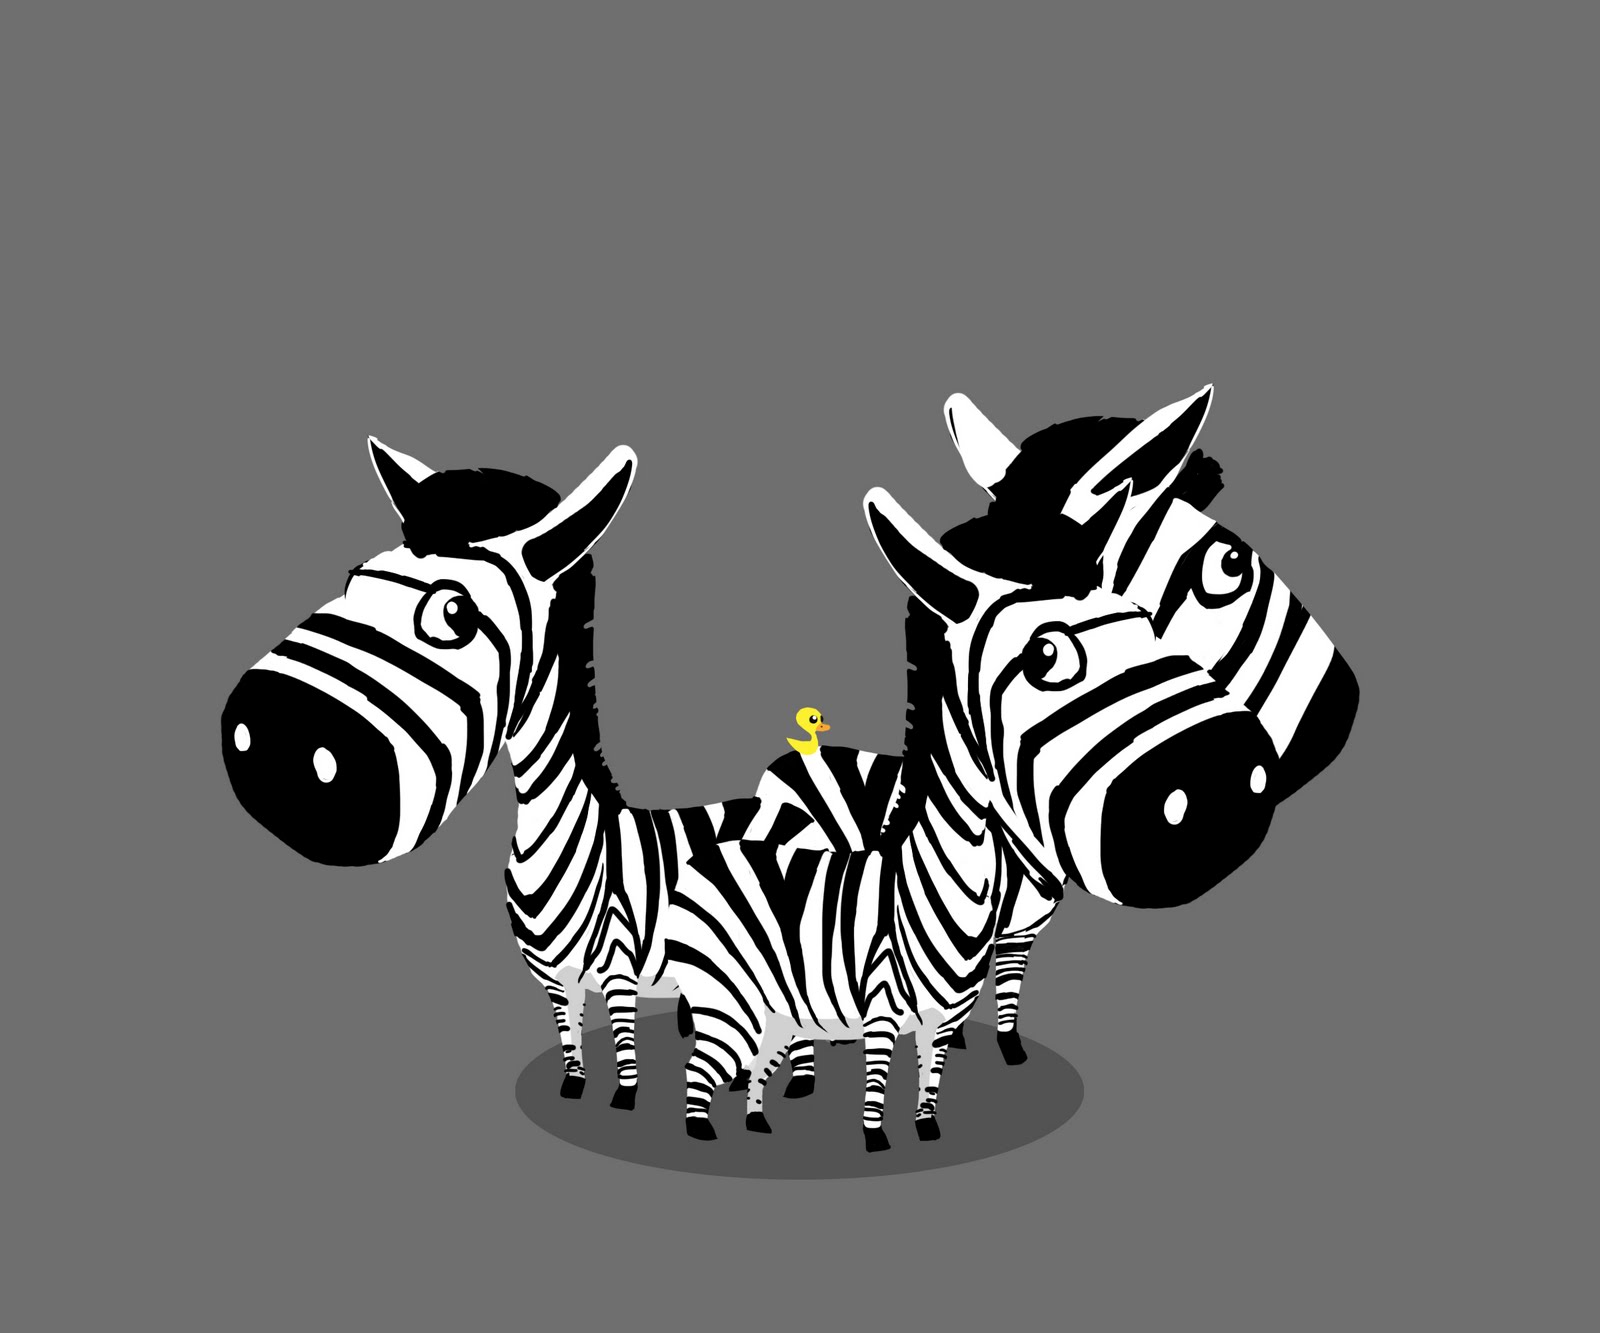 Gallery Images For Animated Zebra